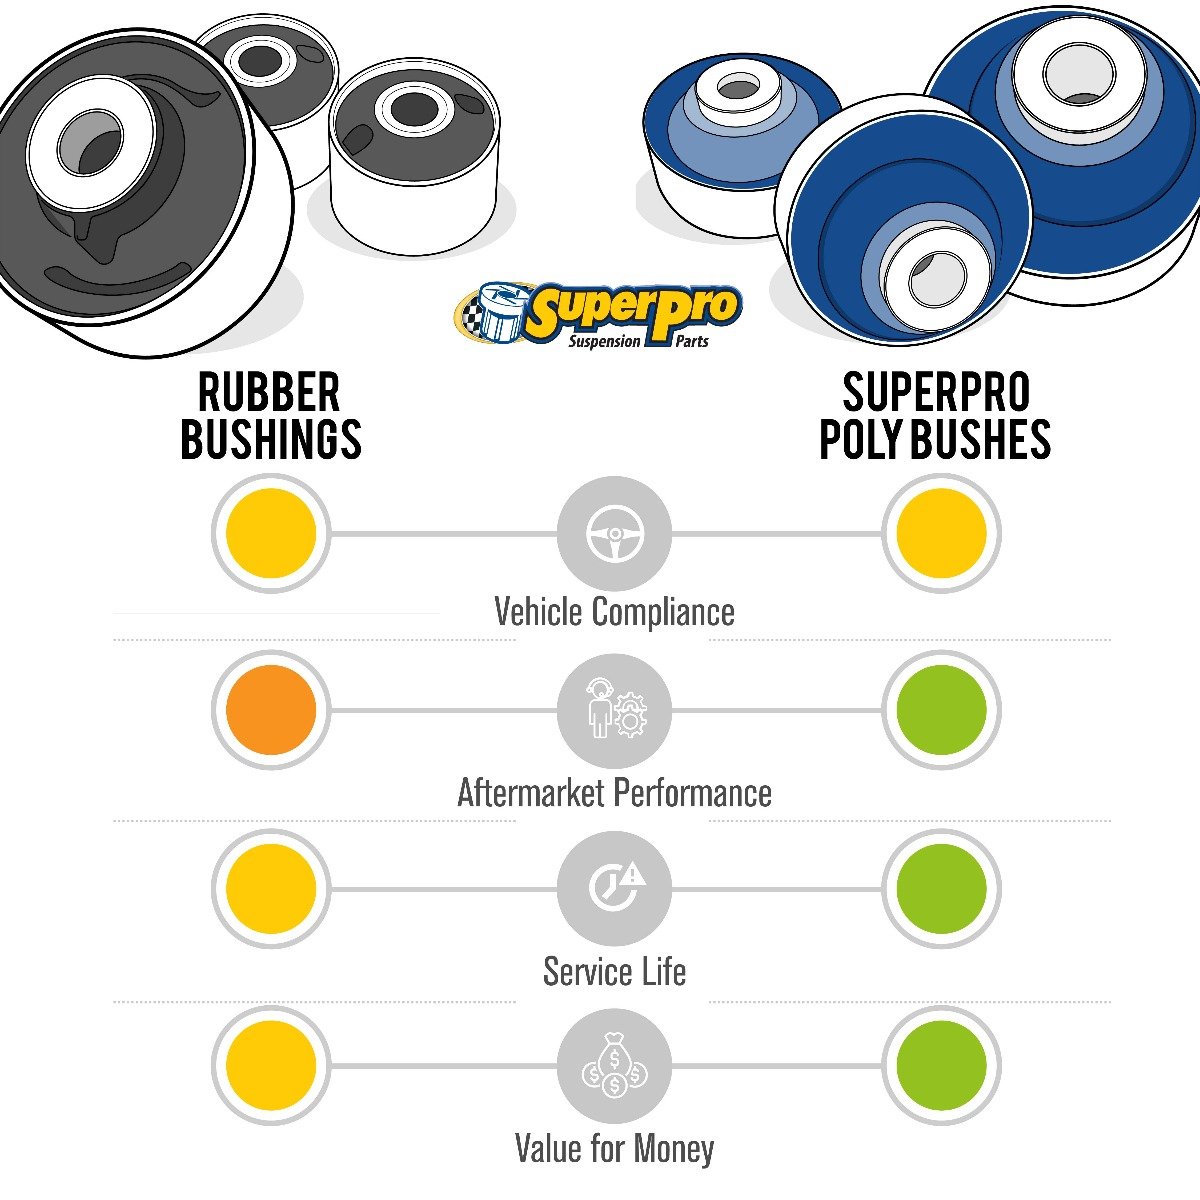 An info graphic showing the basic differences between rubber and poly bushings.